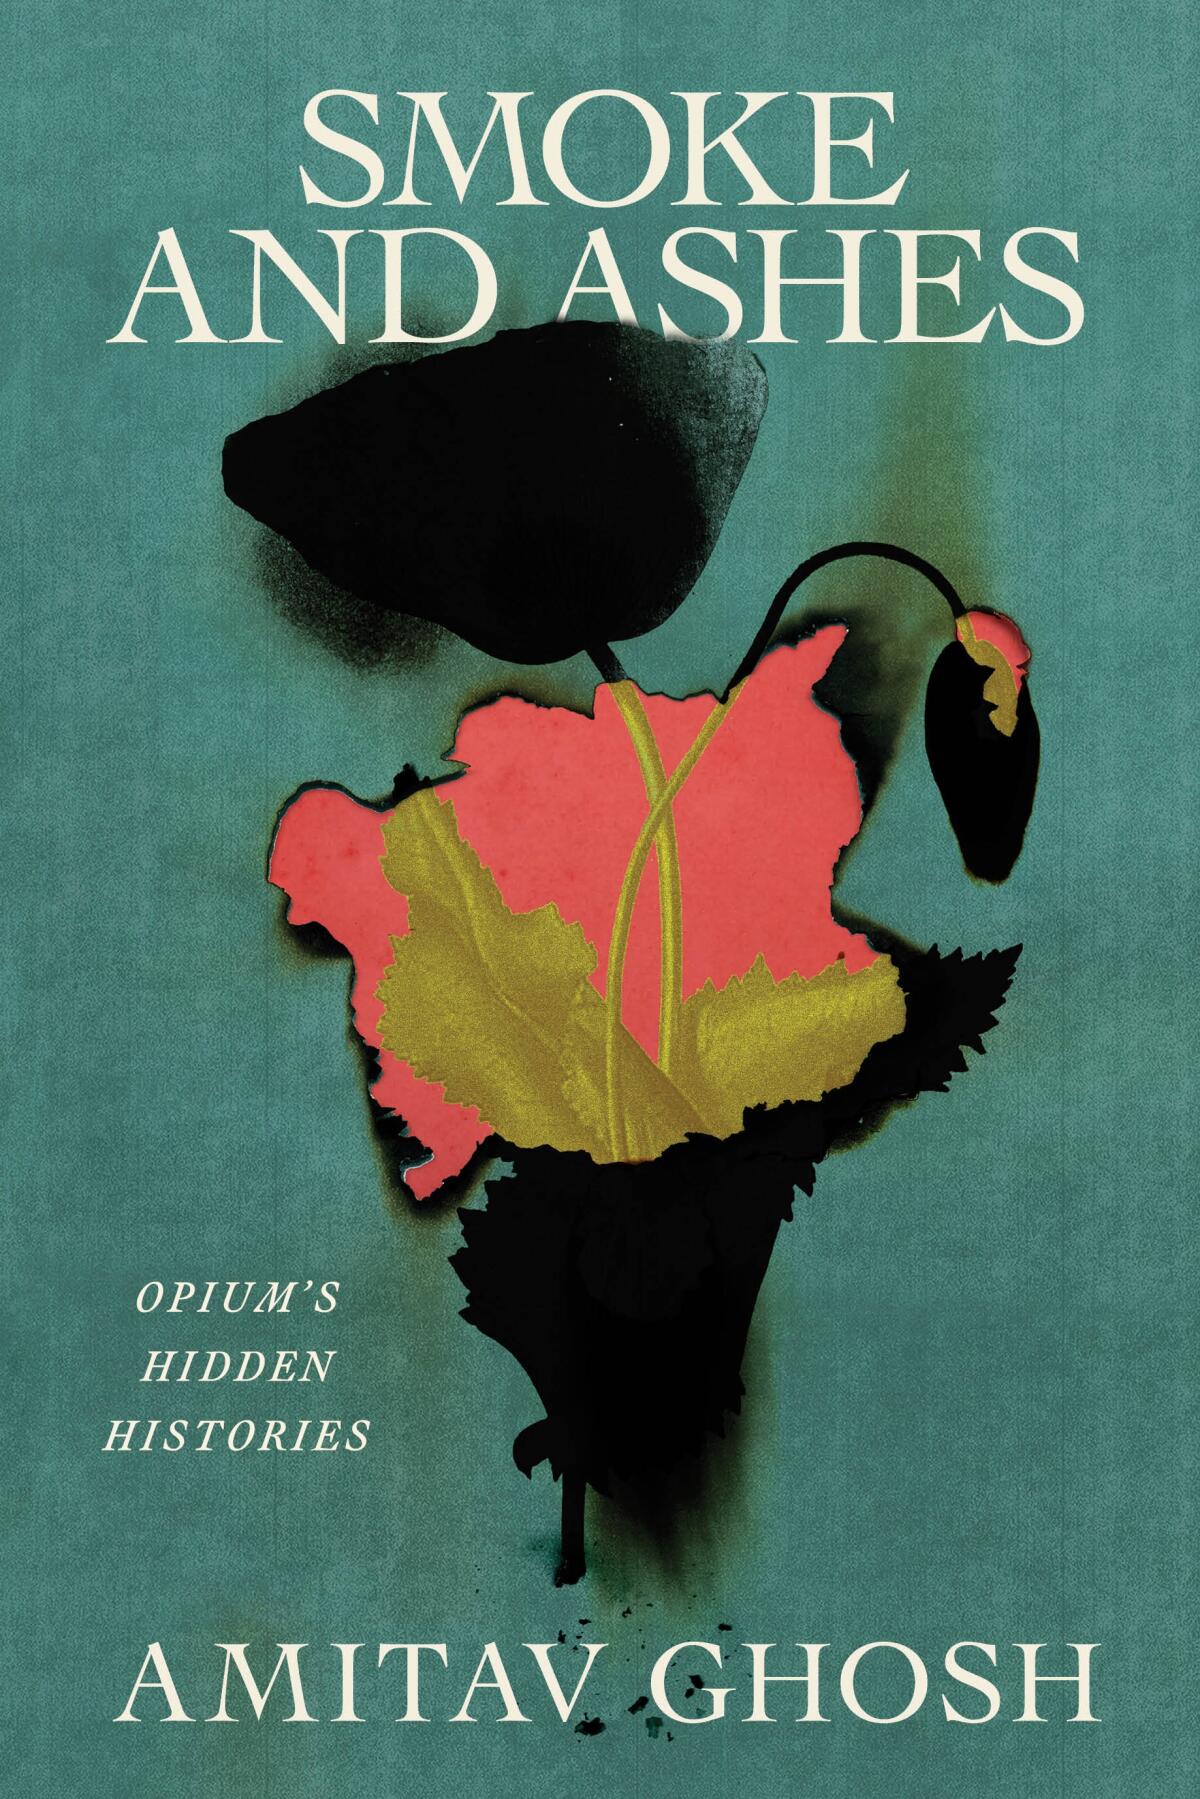 SMOKE AND ASHES: OPIUM'S HIDDEN HISTORIES by Amitav Ghosh